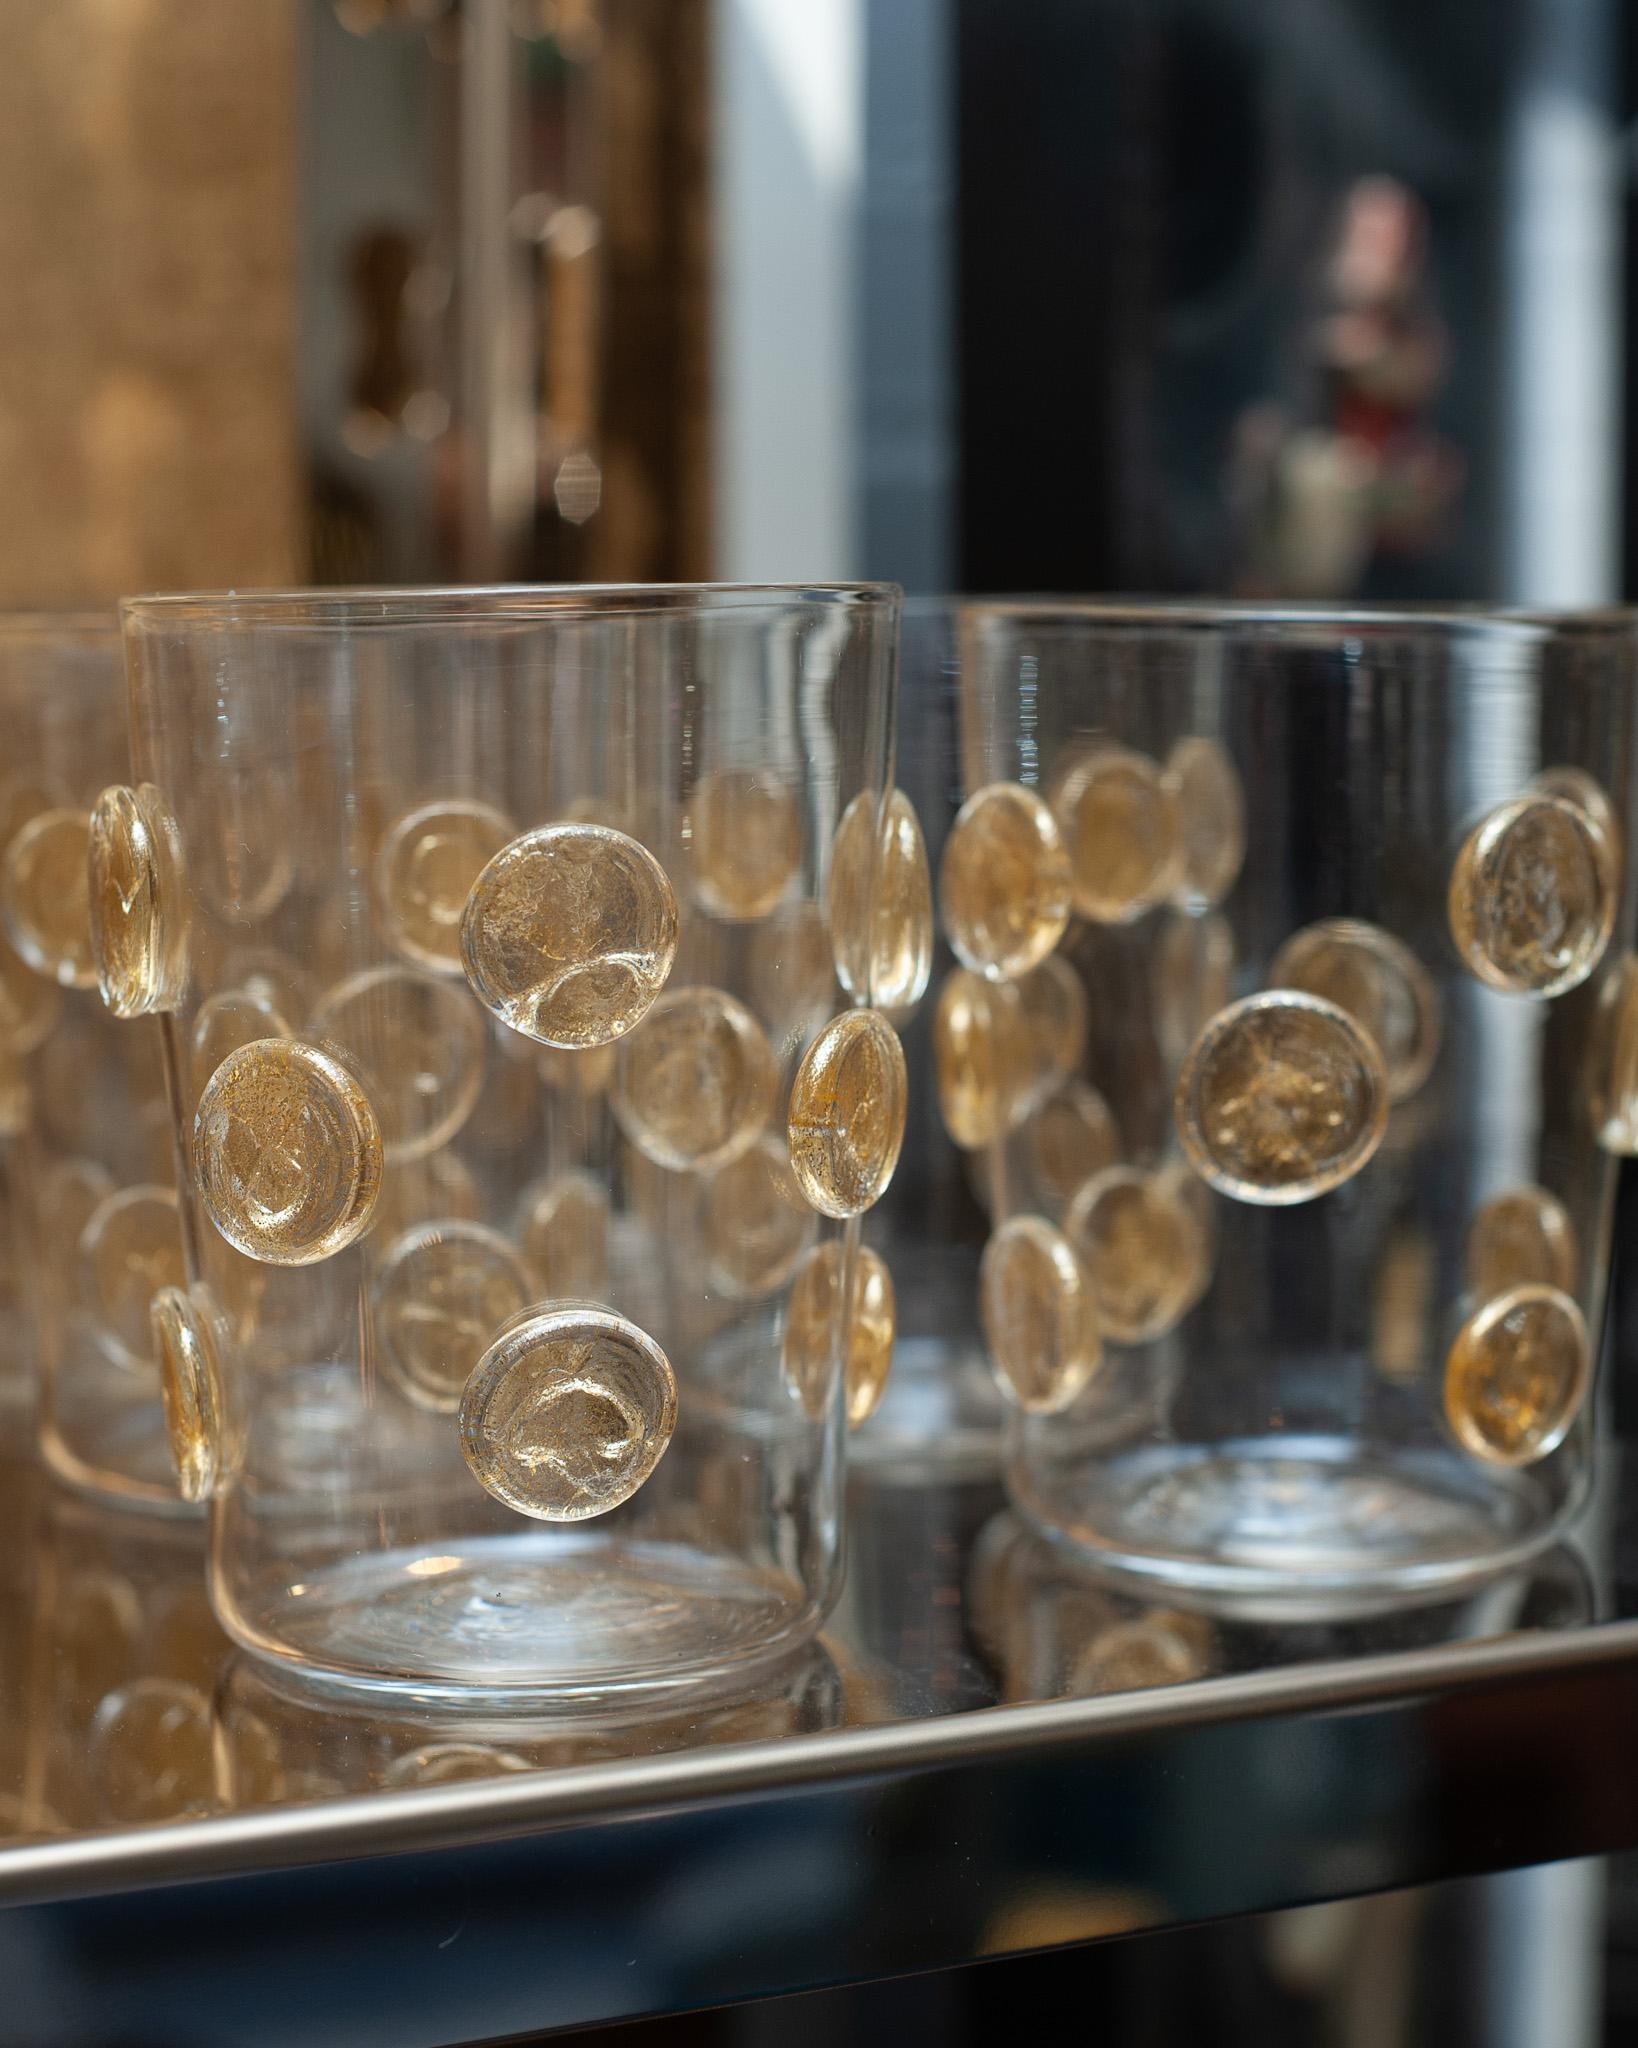 A contemporary set of 12 Murano spotted tumblers with gold leaf by a Venetian master glass blower. Each glass is thin and beautifully crafted with gold leaf spots. Made in Murano, they are true jewelry for the table.